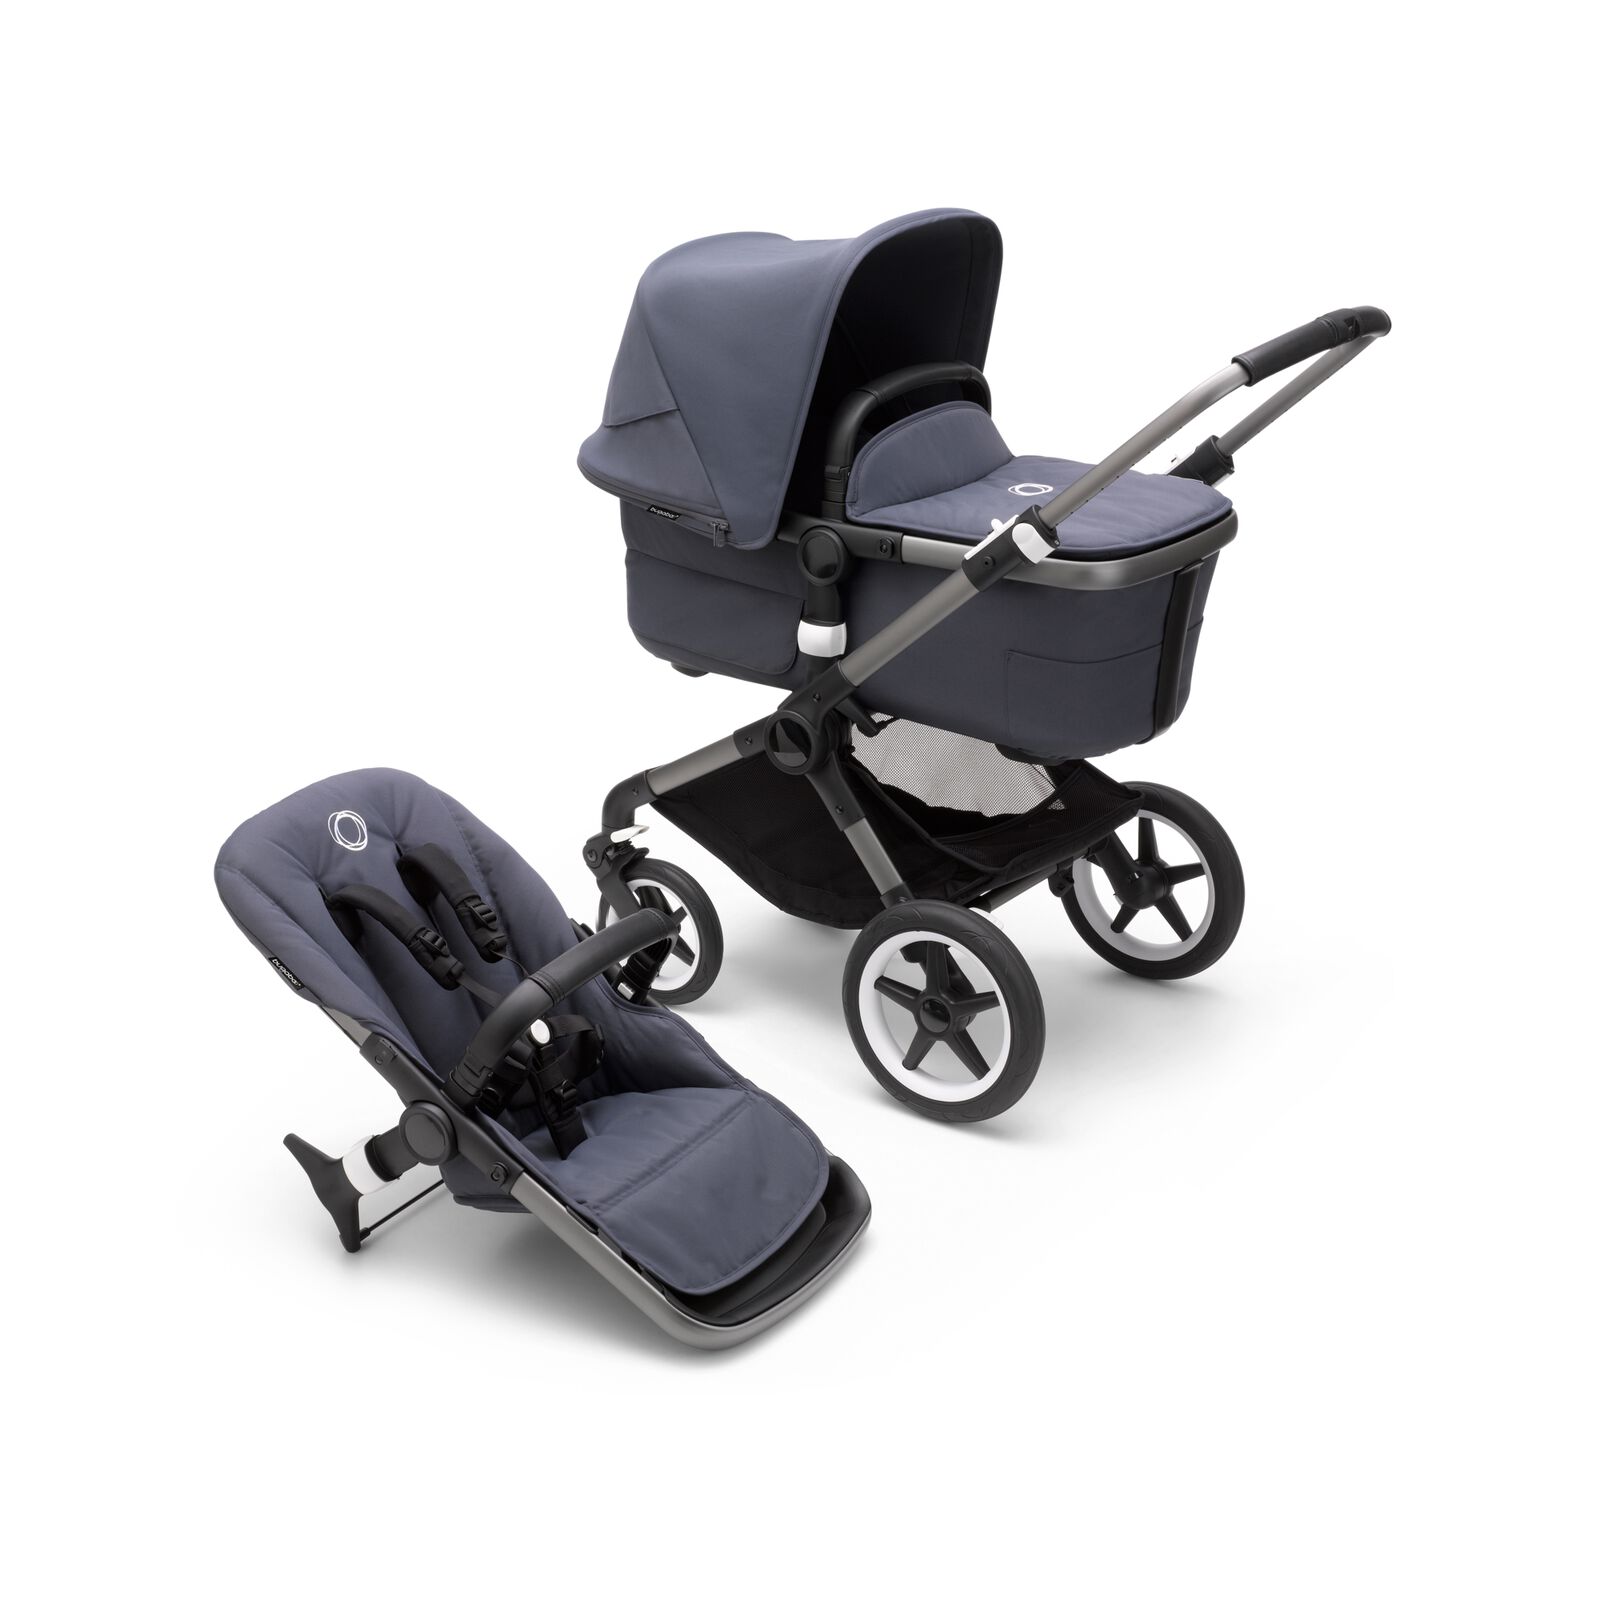 Bugaboo Fox 3 bassinet and seat stroller with graphite frame, stormy blue fabrics, and stormy blue sun canopy.